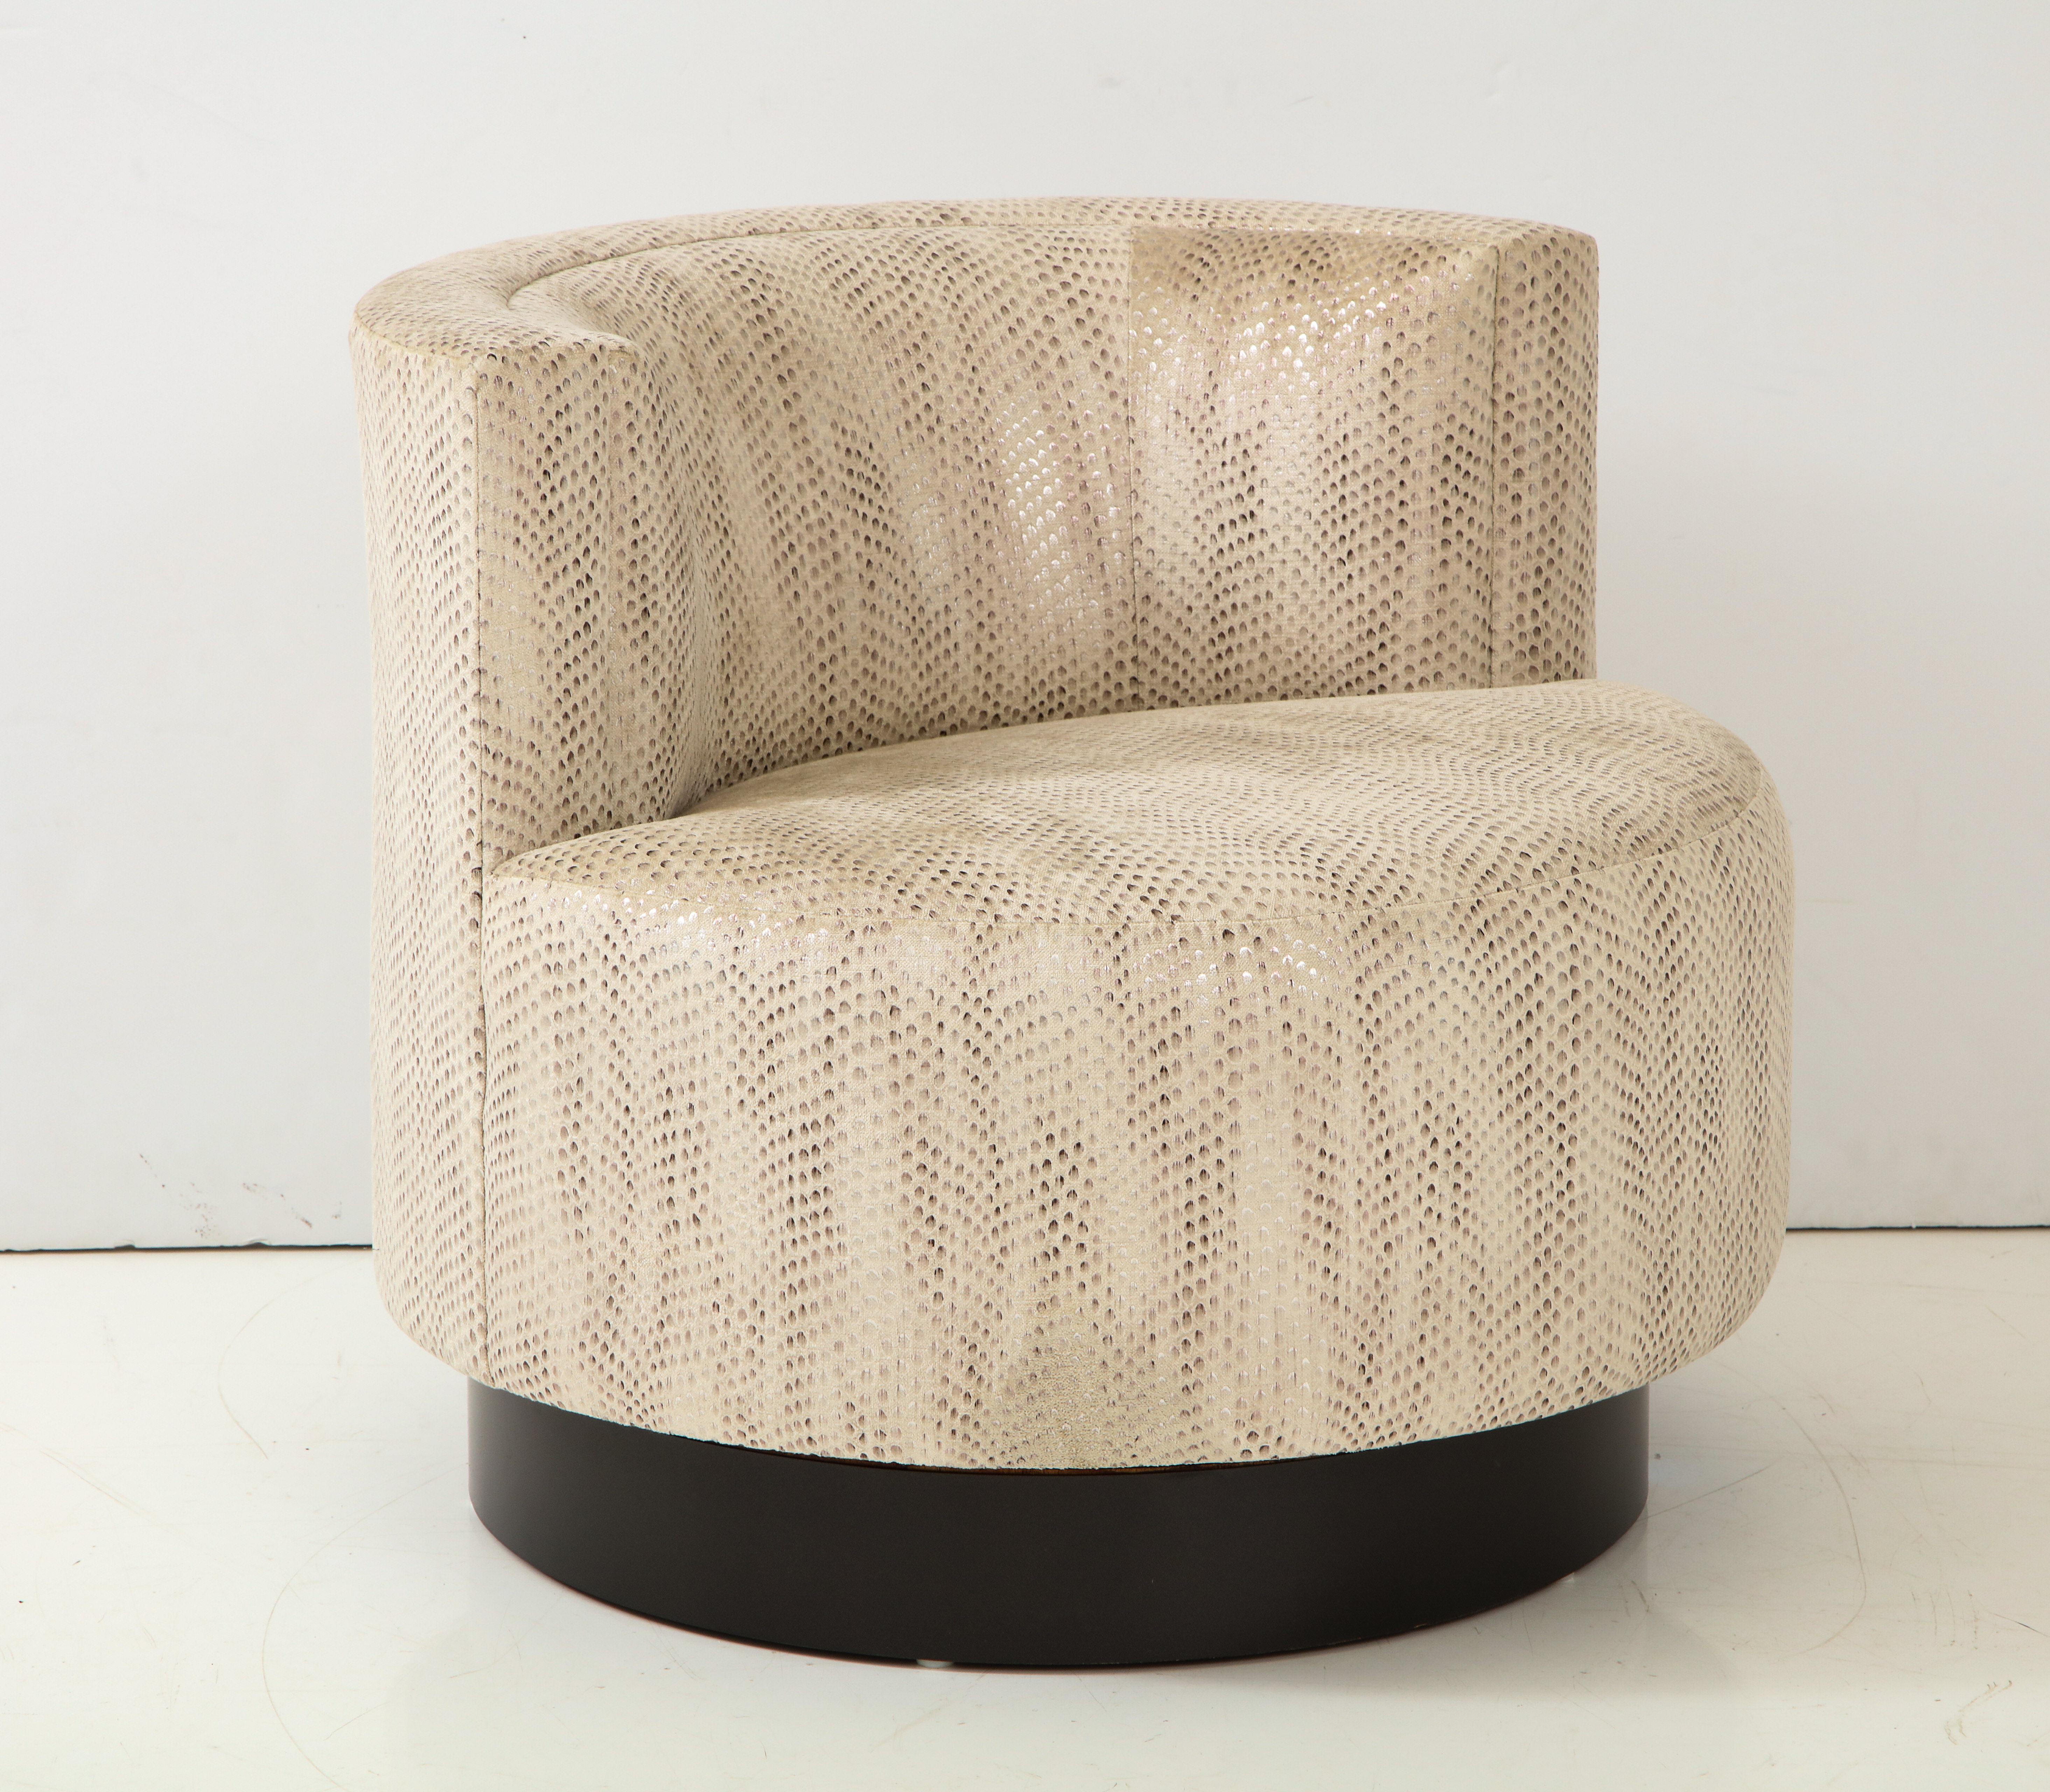 Elegant swivel chair designed by Steve Chase.
The chair has been newly reupholstered in a Luxurious snakeskin foil print fabric
by Zinc Textiles.